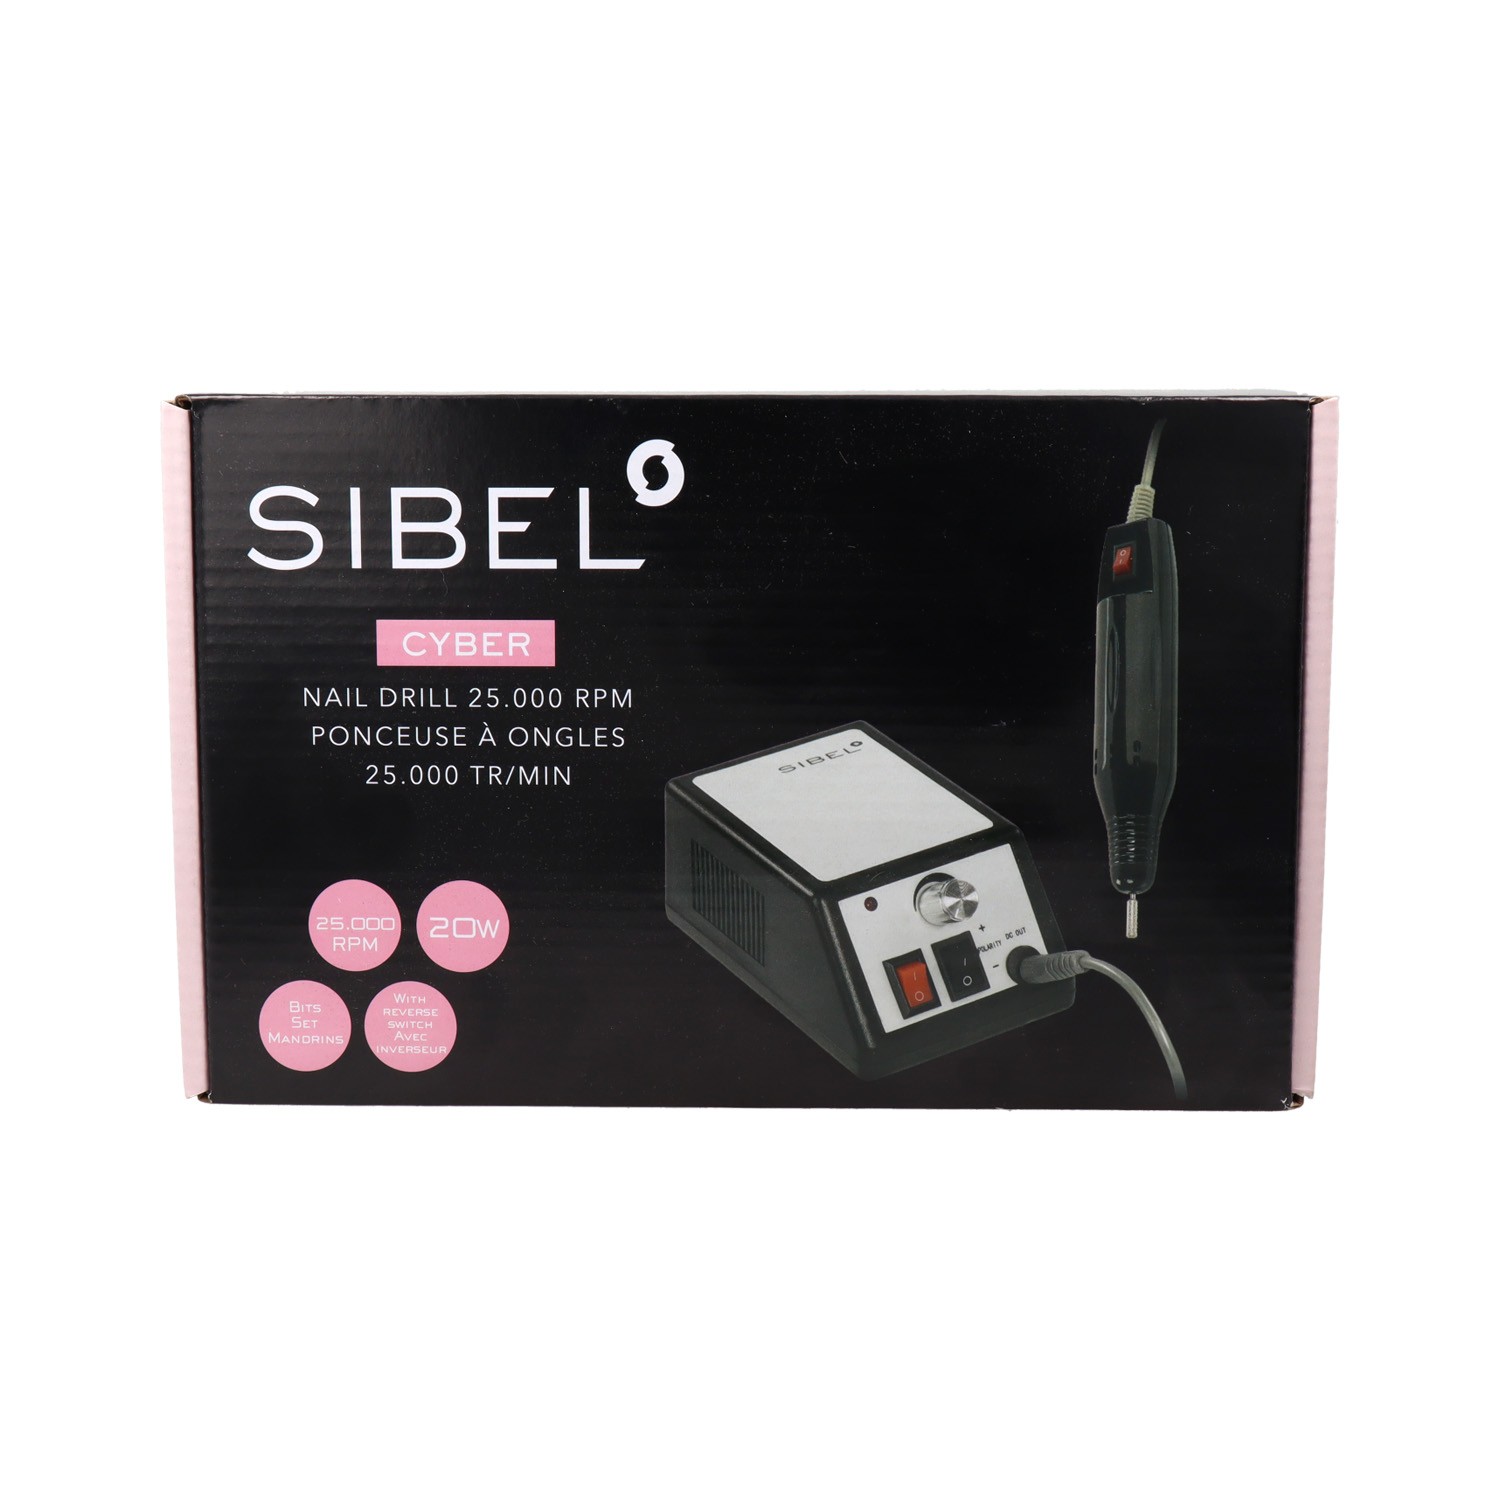 OUTLET Sinelco Sibel Cyber Nail Drill 25.000 Rpm